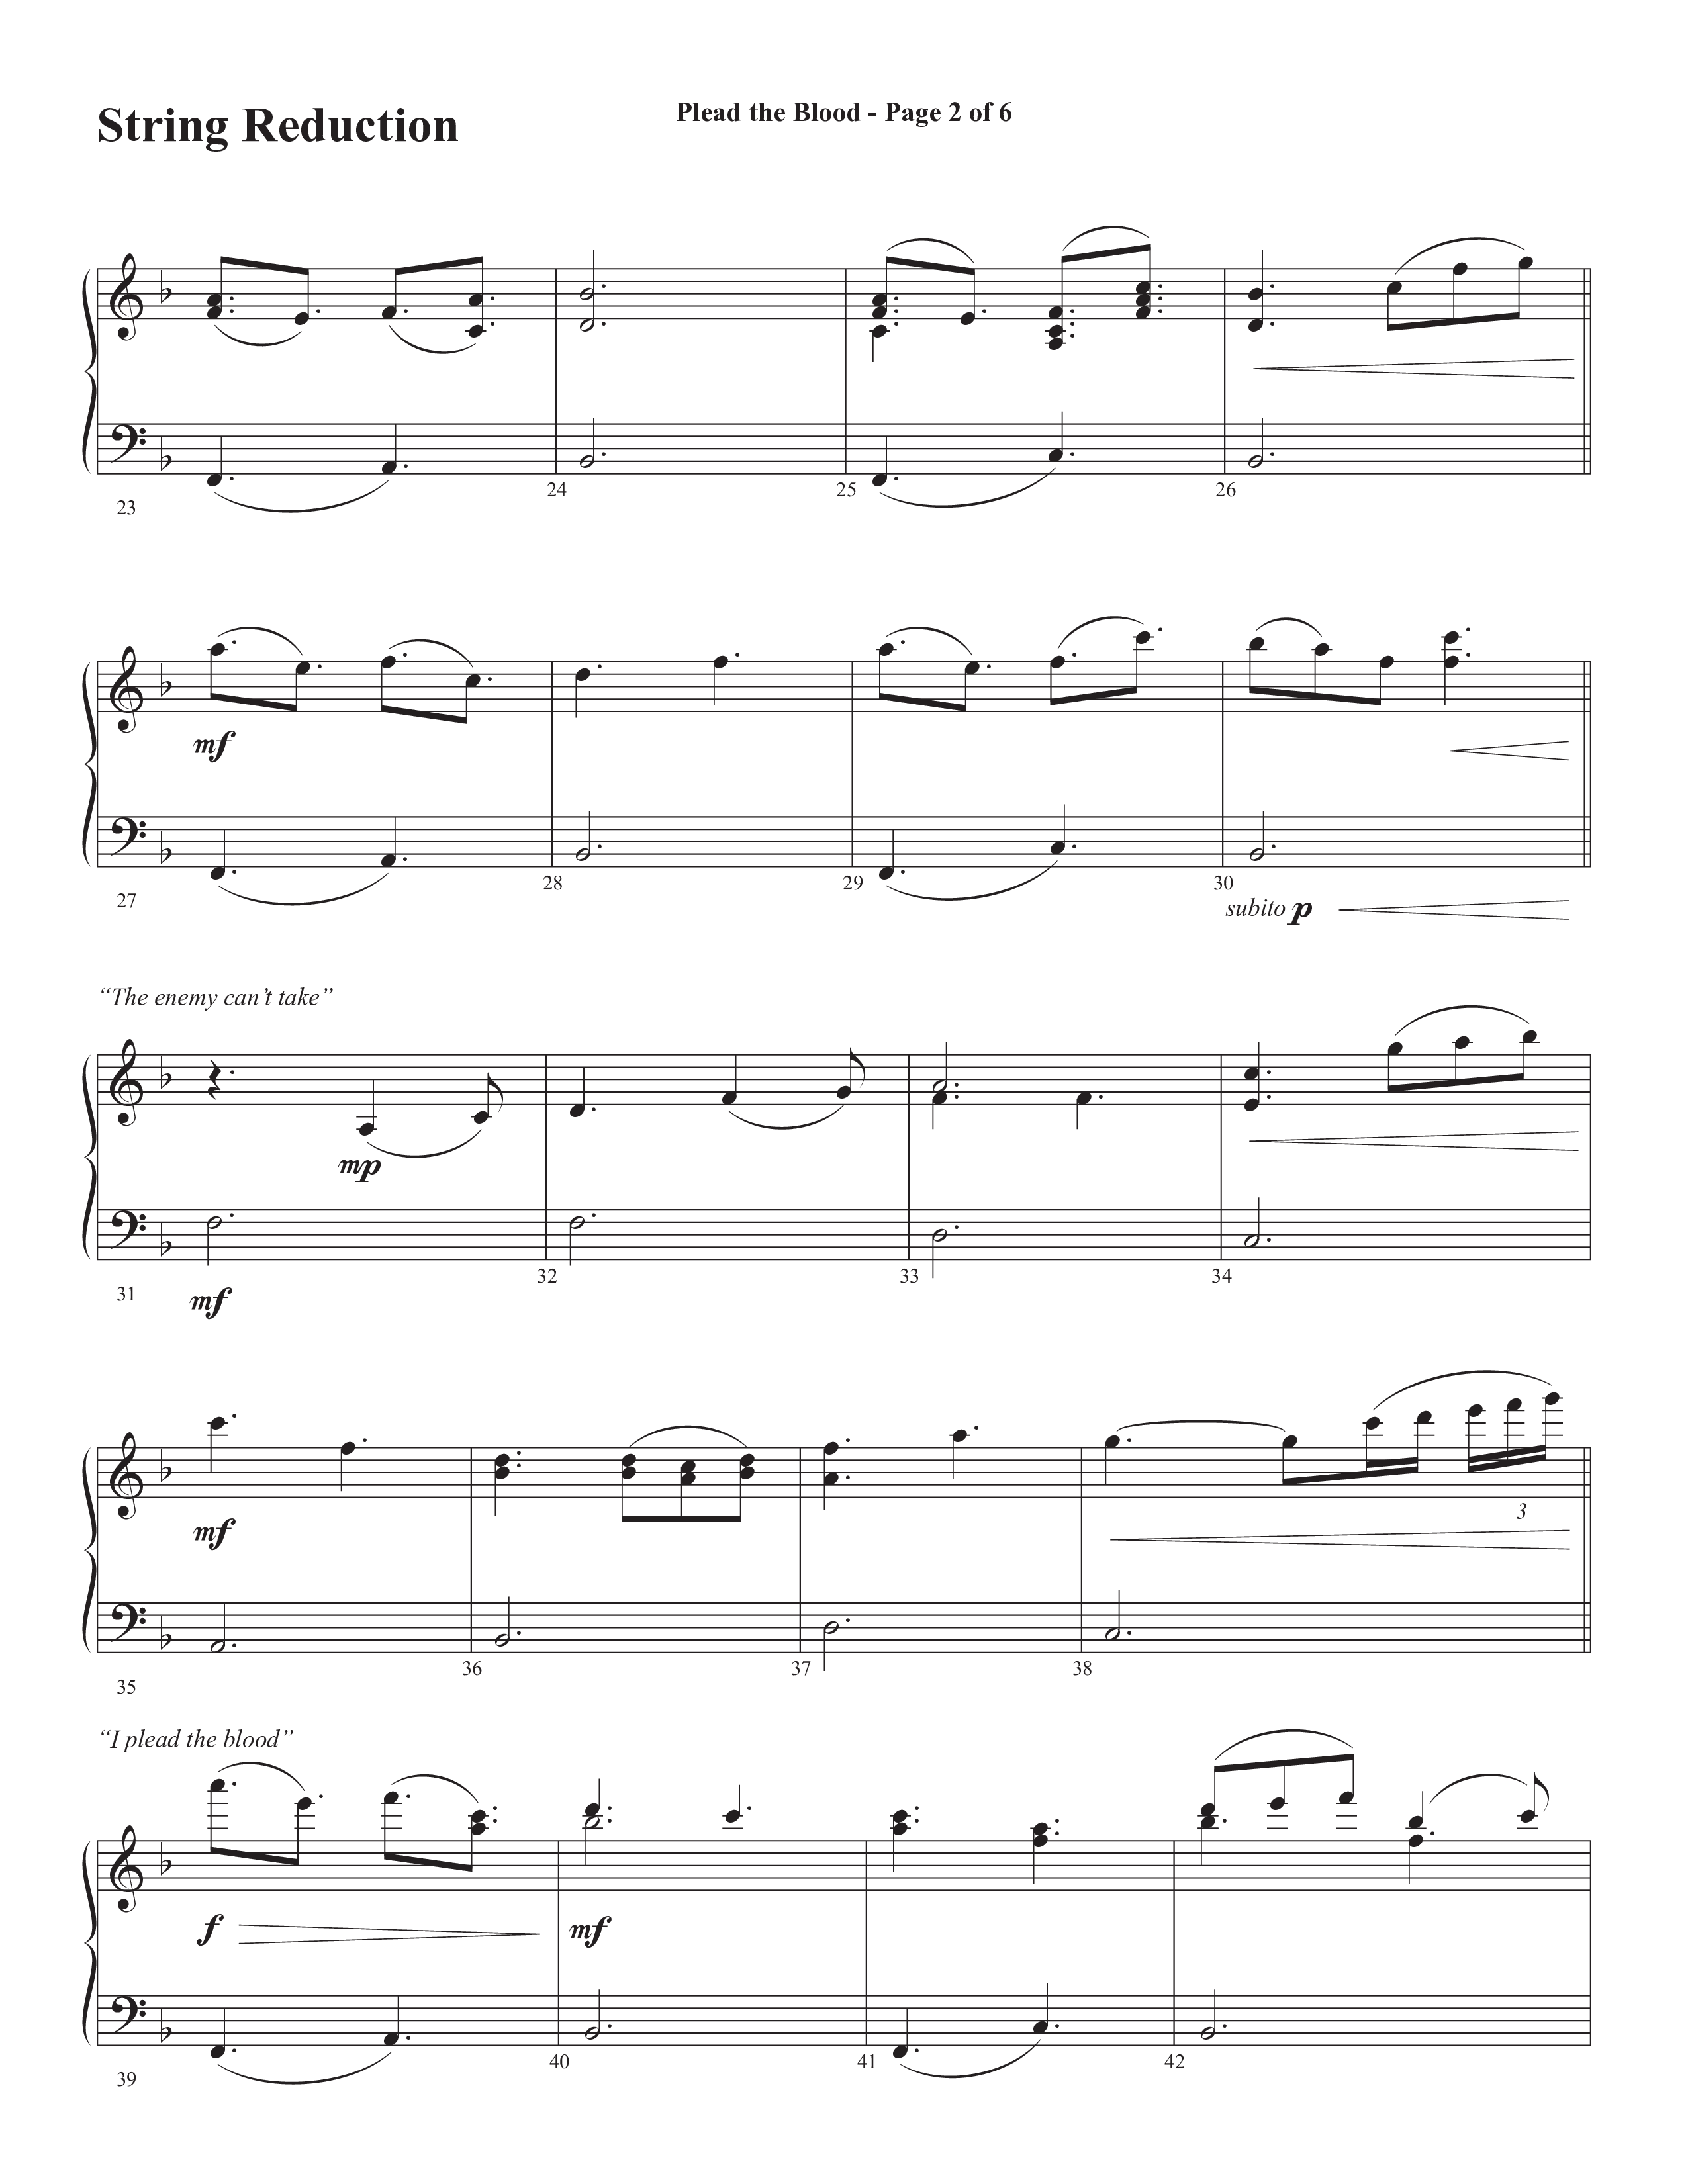 Plead The Blood (with Nothing But The Blood) (Choral Anthem SATB) String Reduction (Semsen Music / Arr. Debora Cahoon)